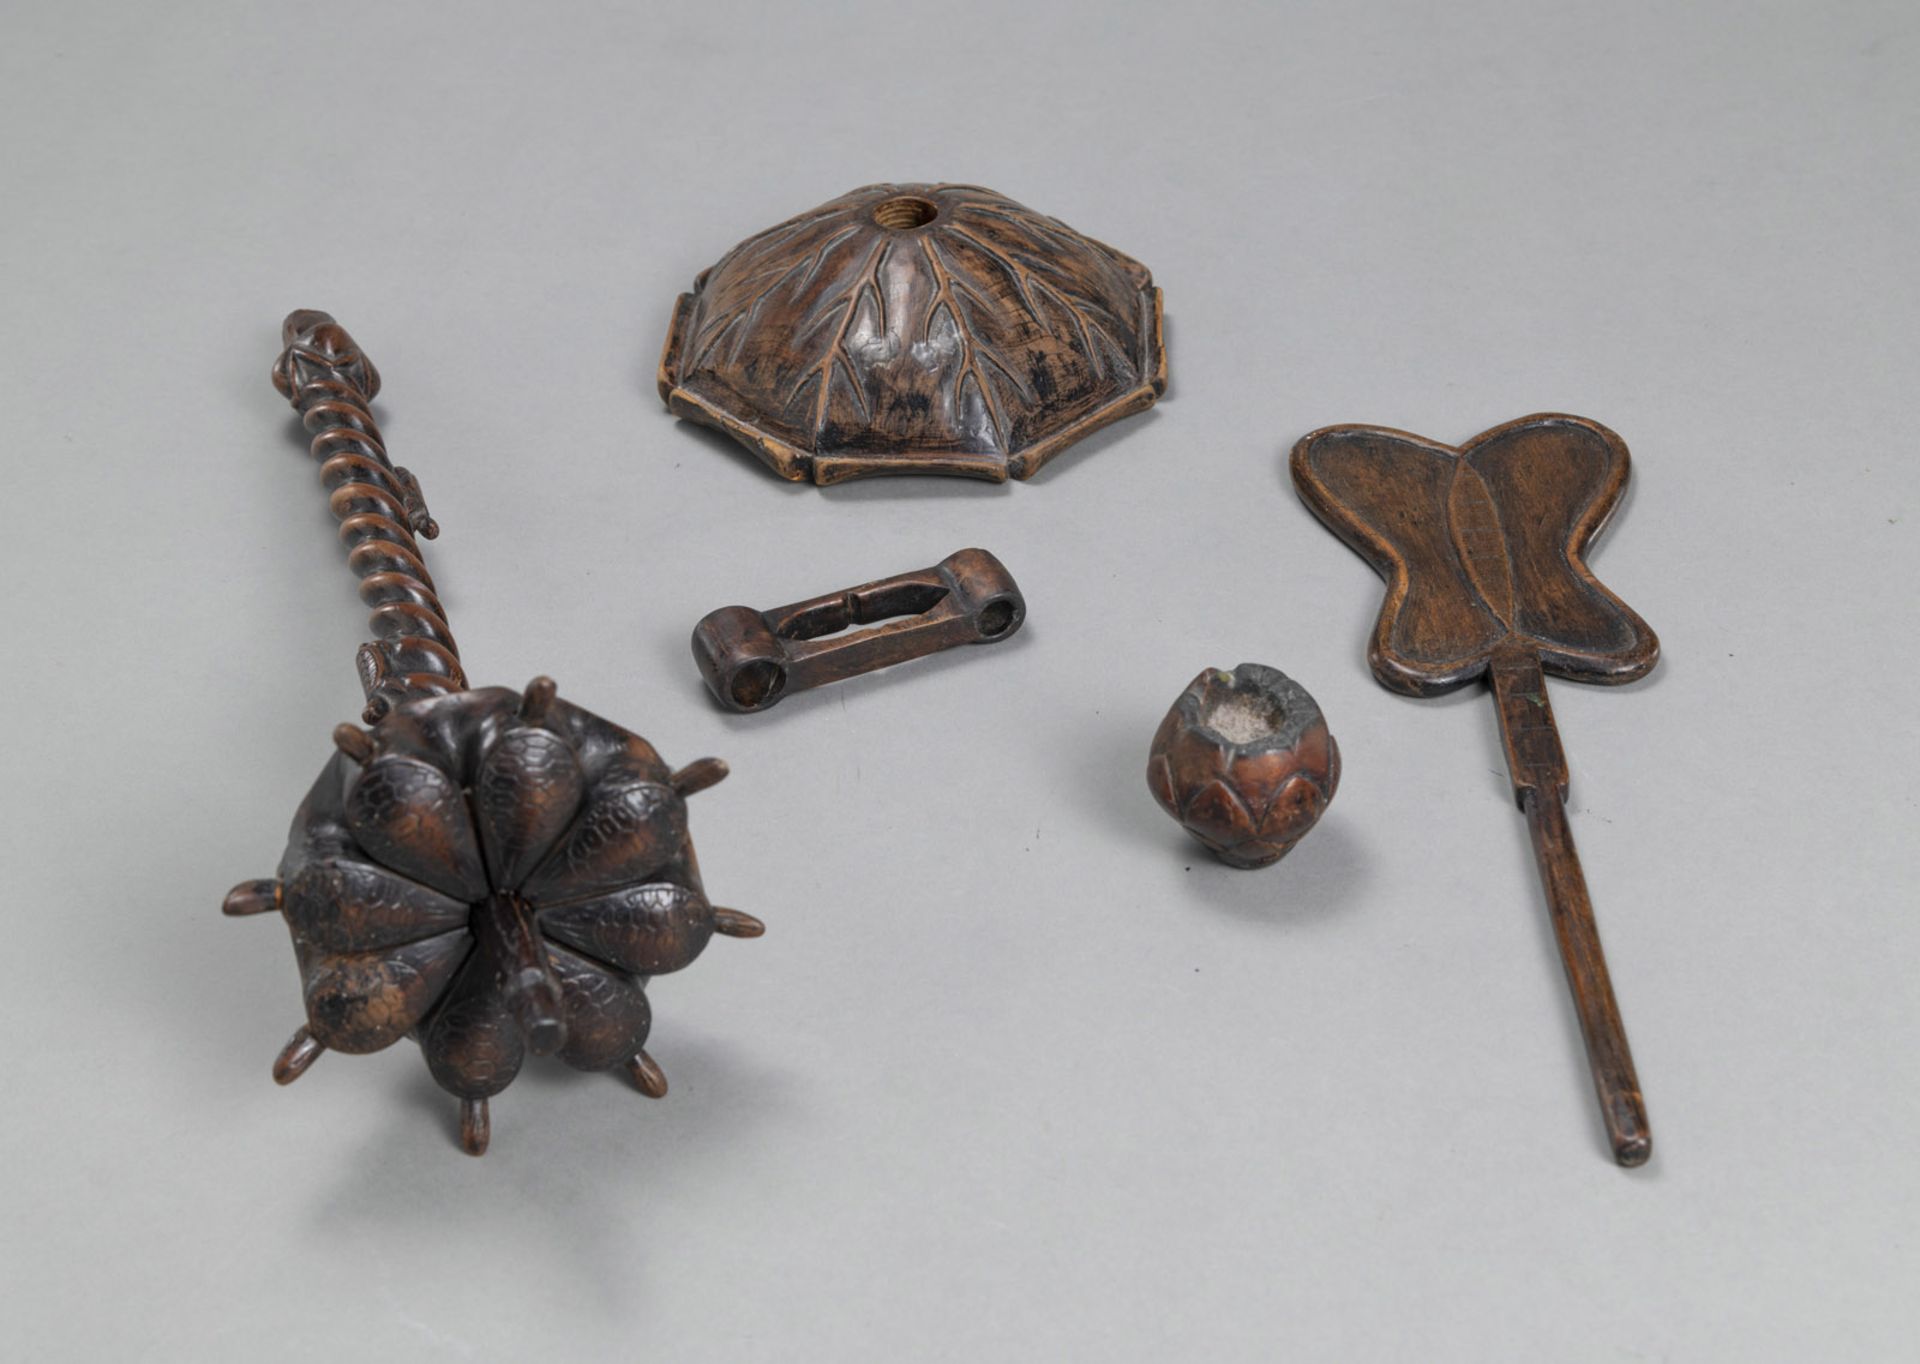 A MULTI-PART WOODEN CANDLESTICK  IN THE SHAPE OF A LOTUS DECORATED WITH SMALL TURTLES AND A LEAF FA - Image 3 of 3